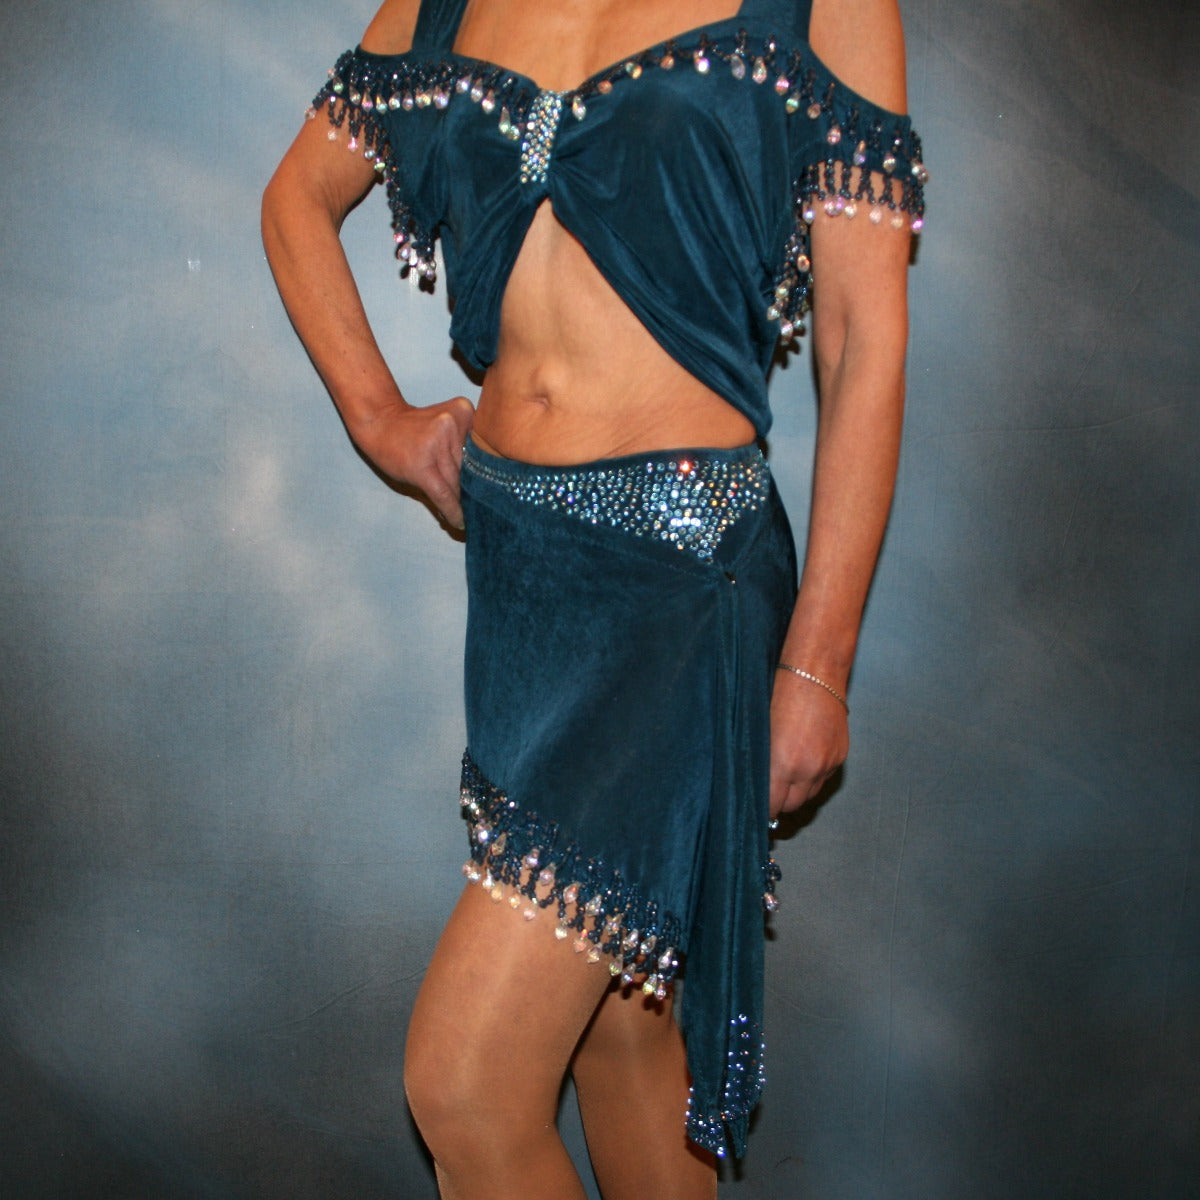 Crystal's Creations close up view of 2 piece blue Latin/rhythm dance dress was created of deep sea blue luxurious solid slinky with cascades of hand beaded fringe plus light sapphire Swarovski rhinestone work. The Latin dance skirt has built in tights.